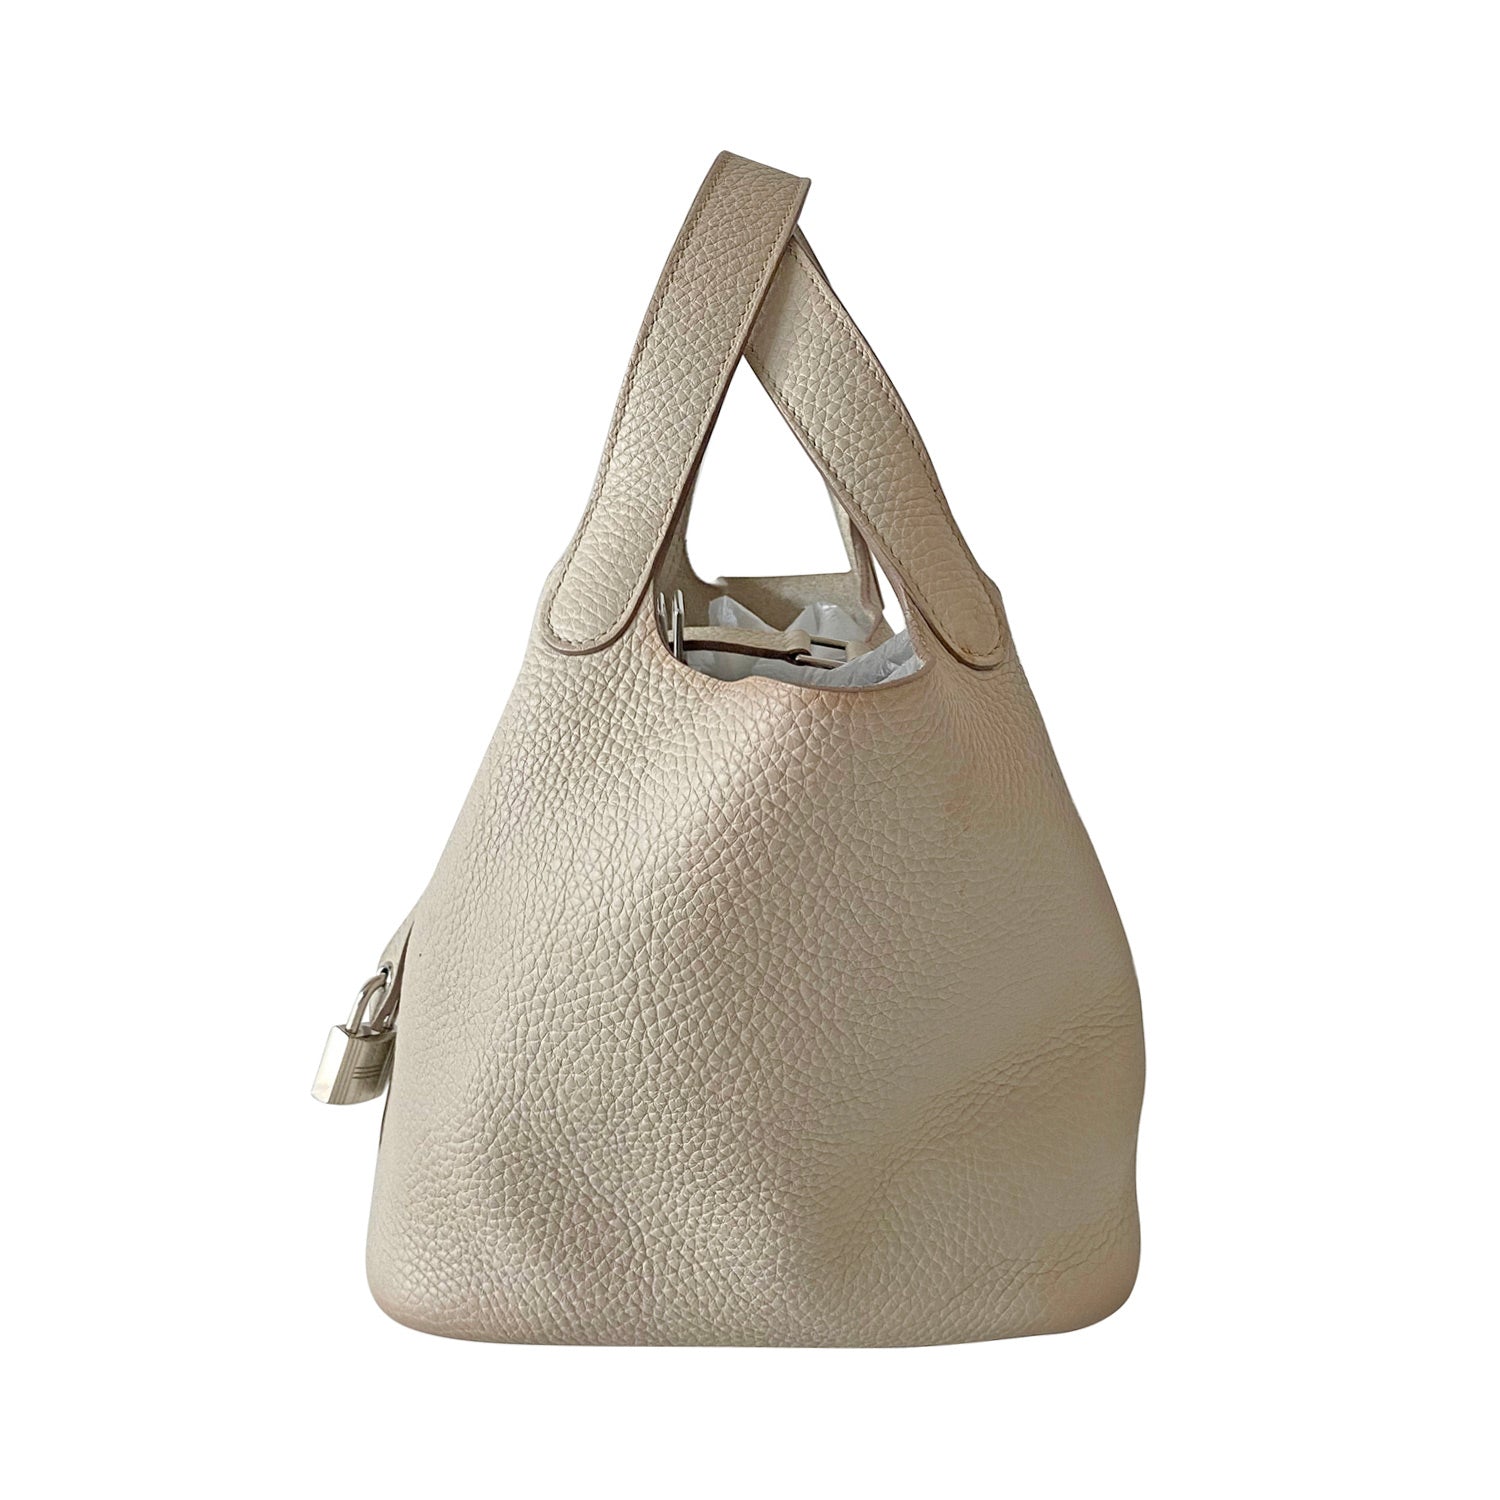 Shop authentic Hermès White Picotin 18 at revogue for just USD 2,700.00